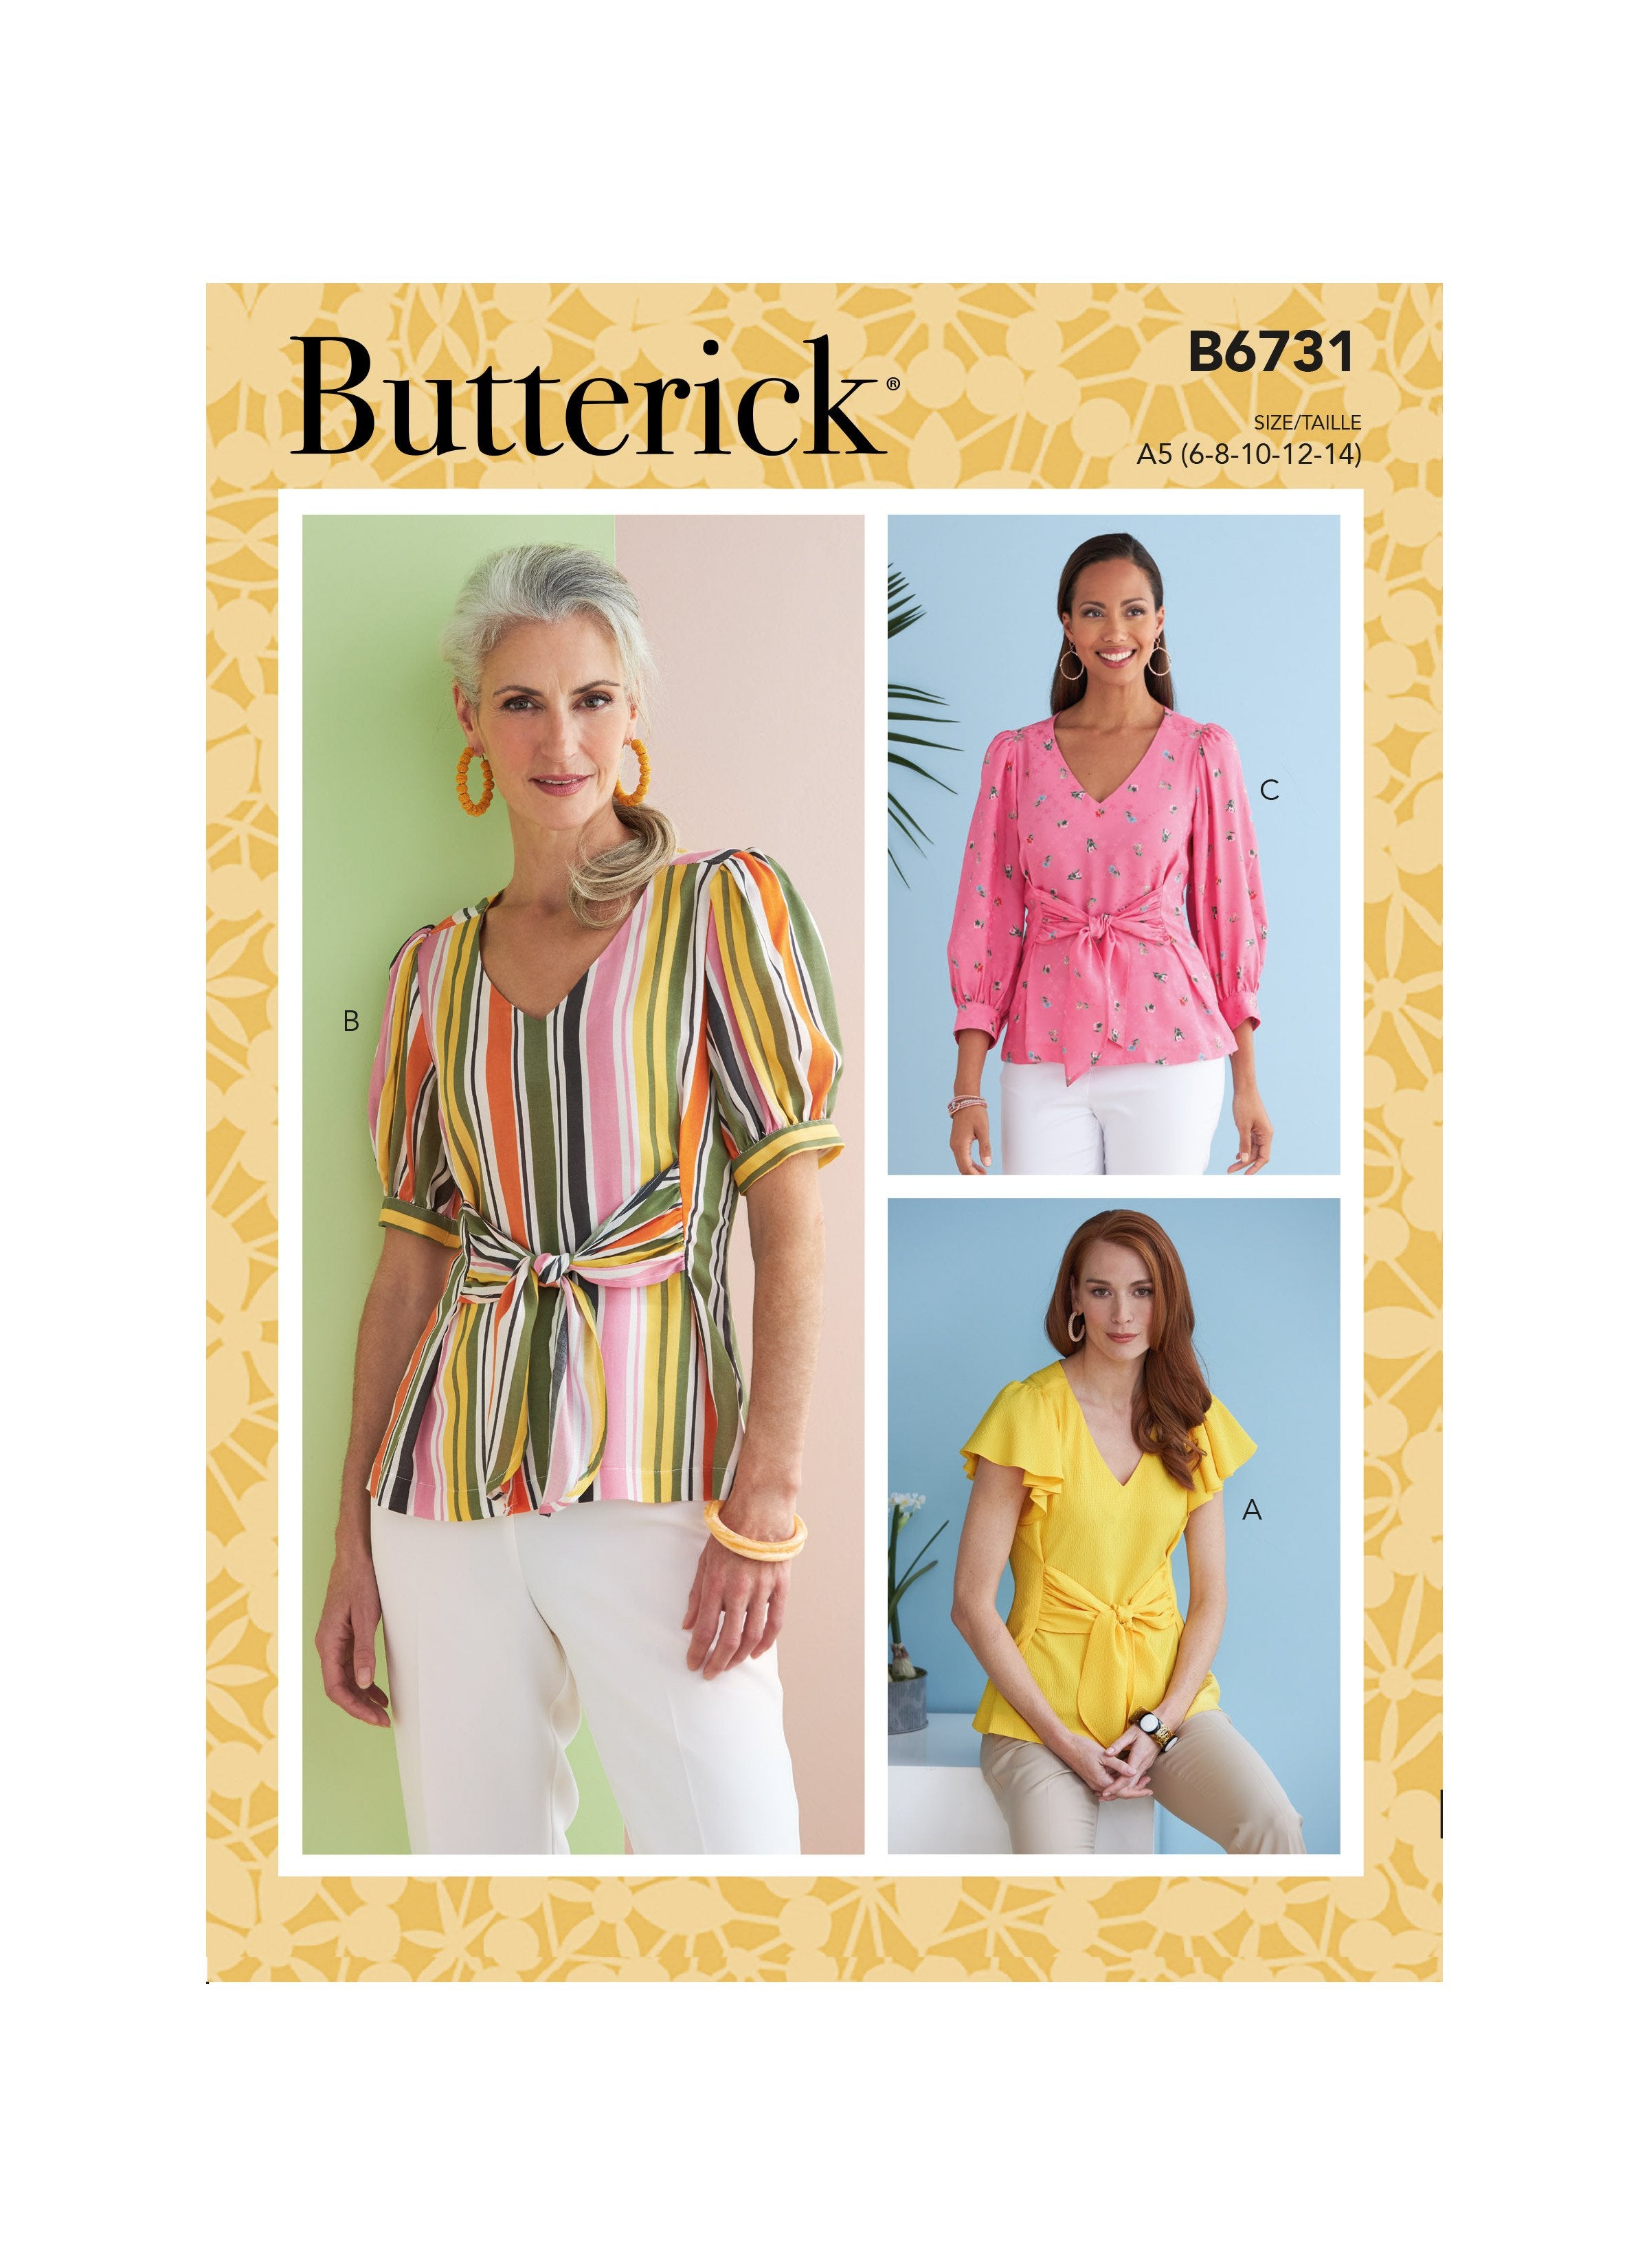 Butterick Sewing Pattern 6731 Misses' Top from Jaycotts Sewing Supplies